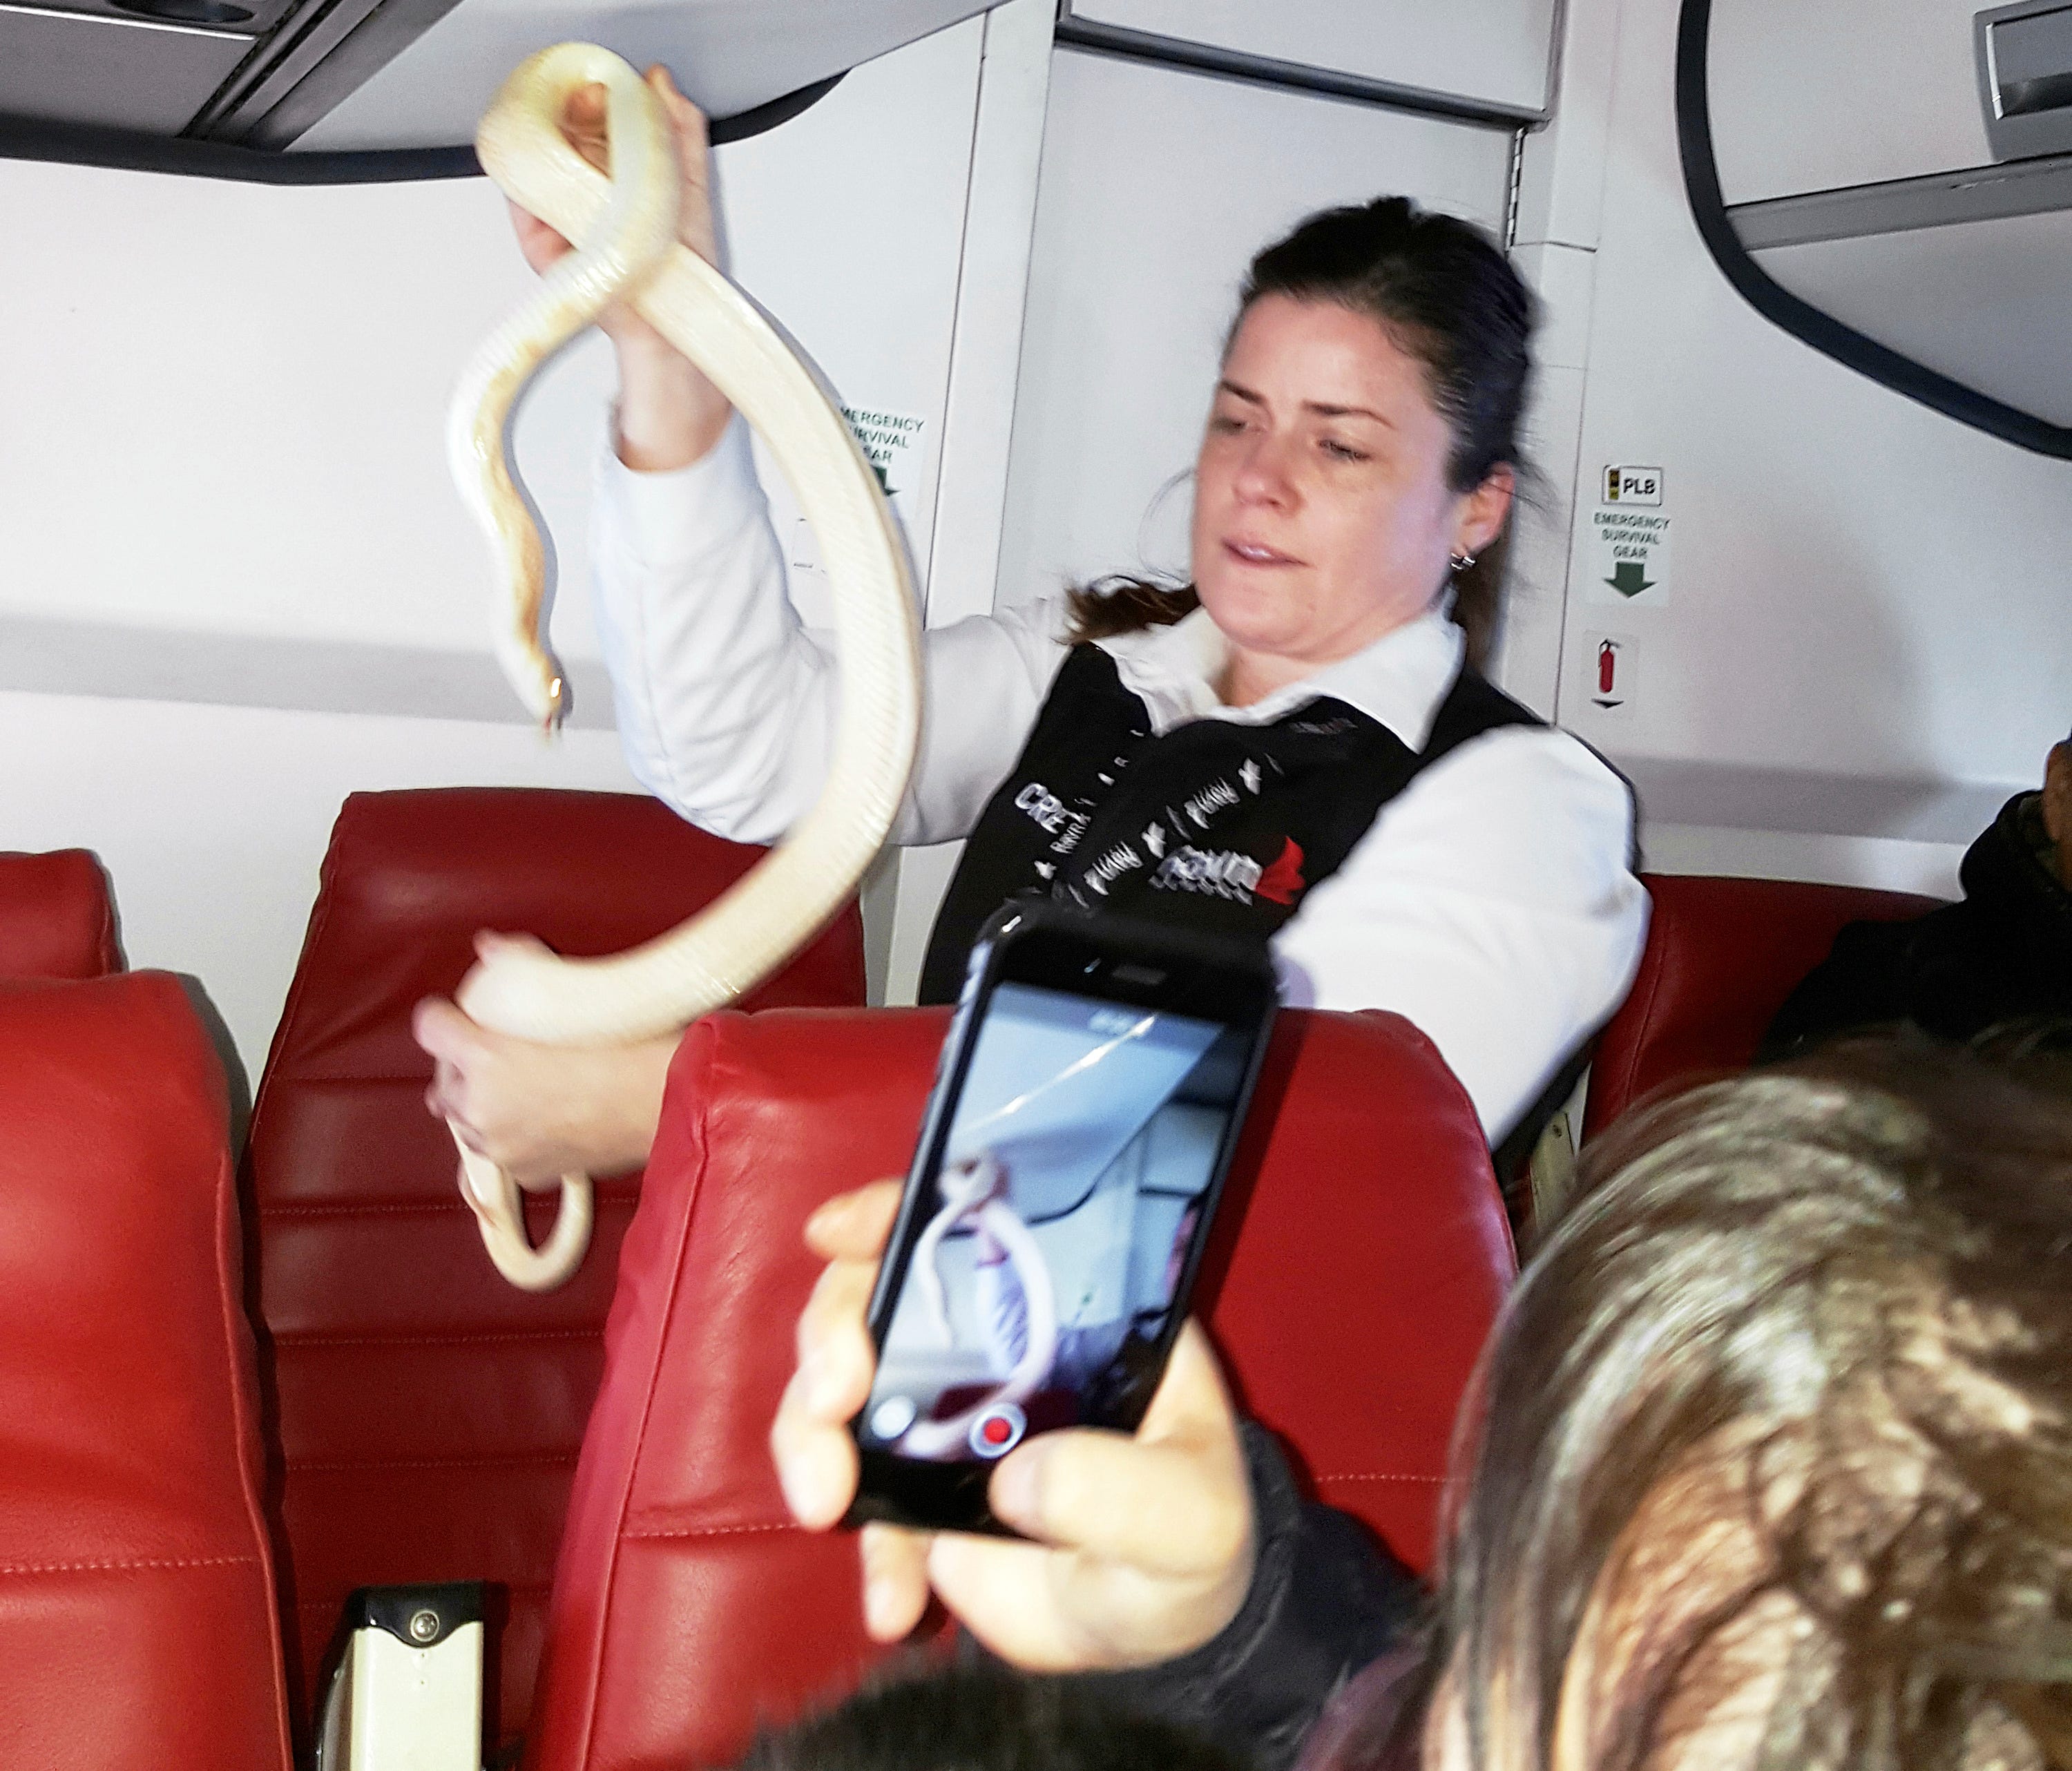 In this Sunday, March 19, 2017 photo, a flight attendant holds a snake found on a Ravn Alaska flight between Aniak, Alaska,and Anchorage. The snake escaped from a passenger on a previous flight. The flight attendant captured the reptile and placed it